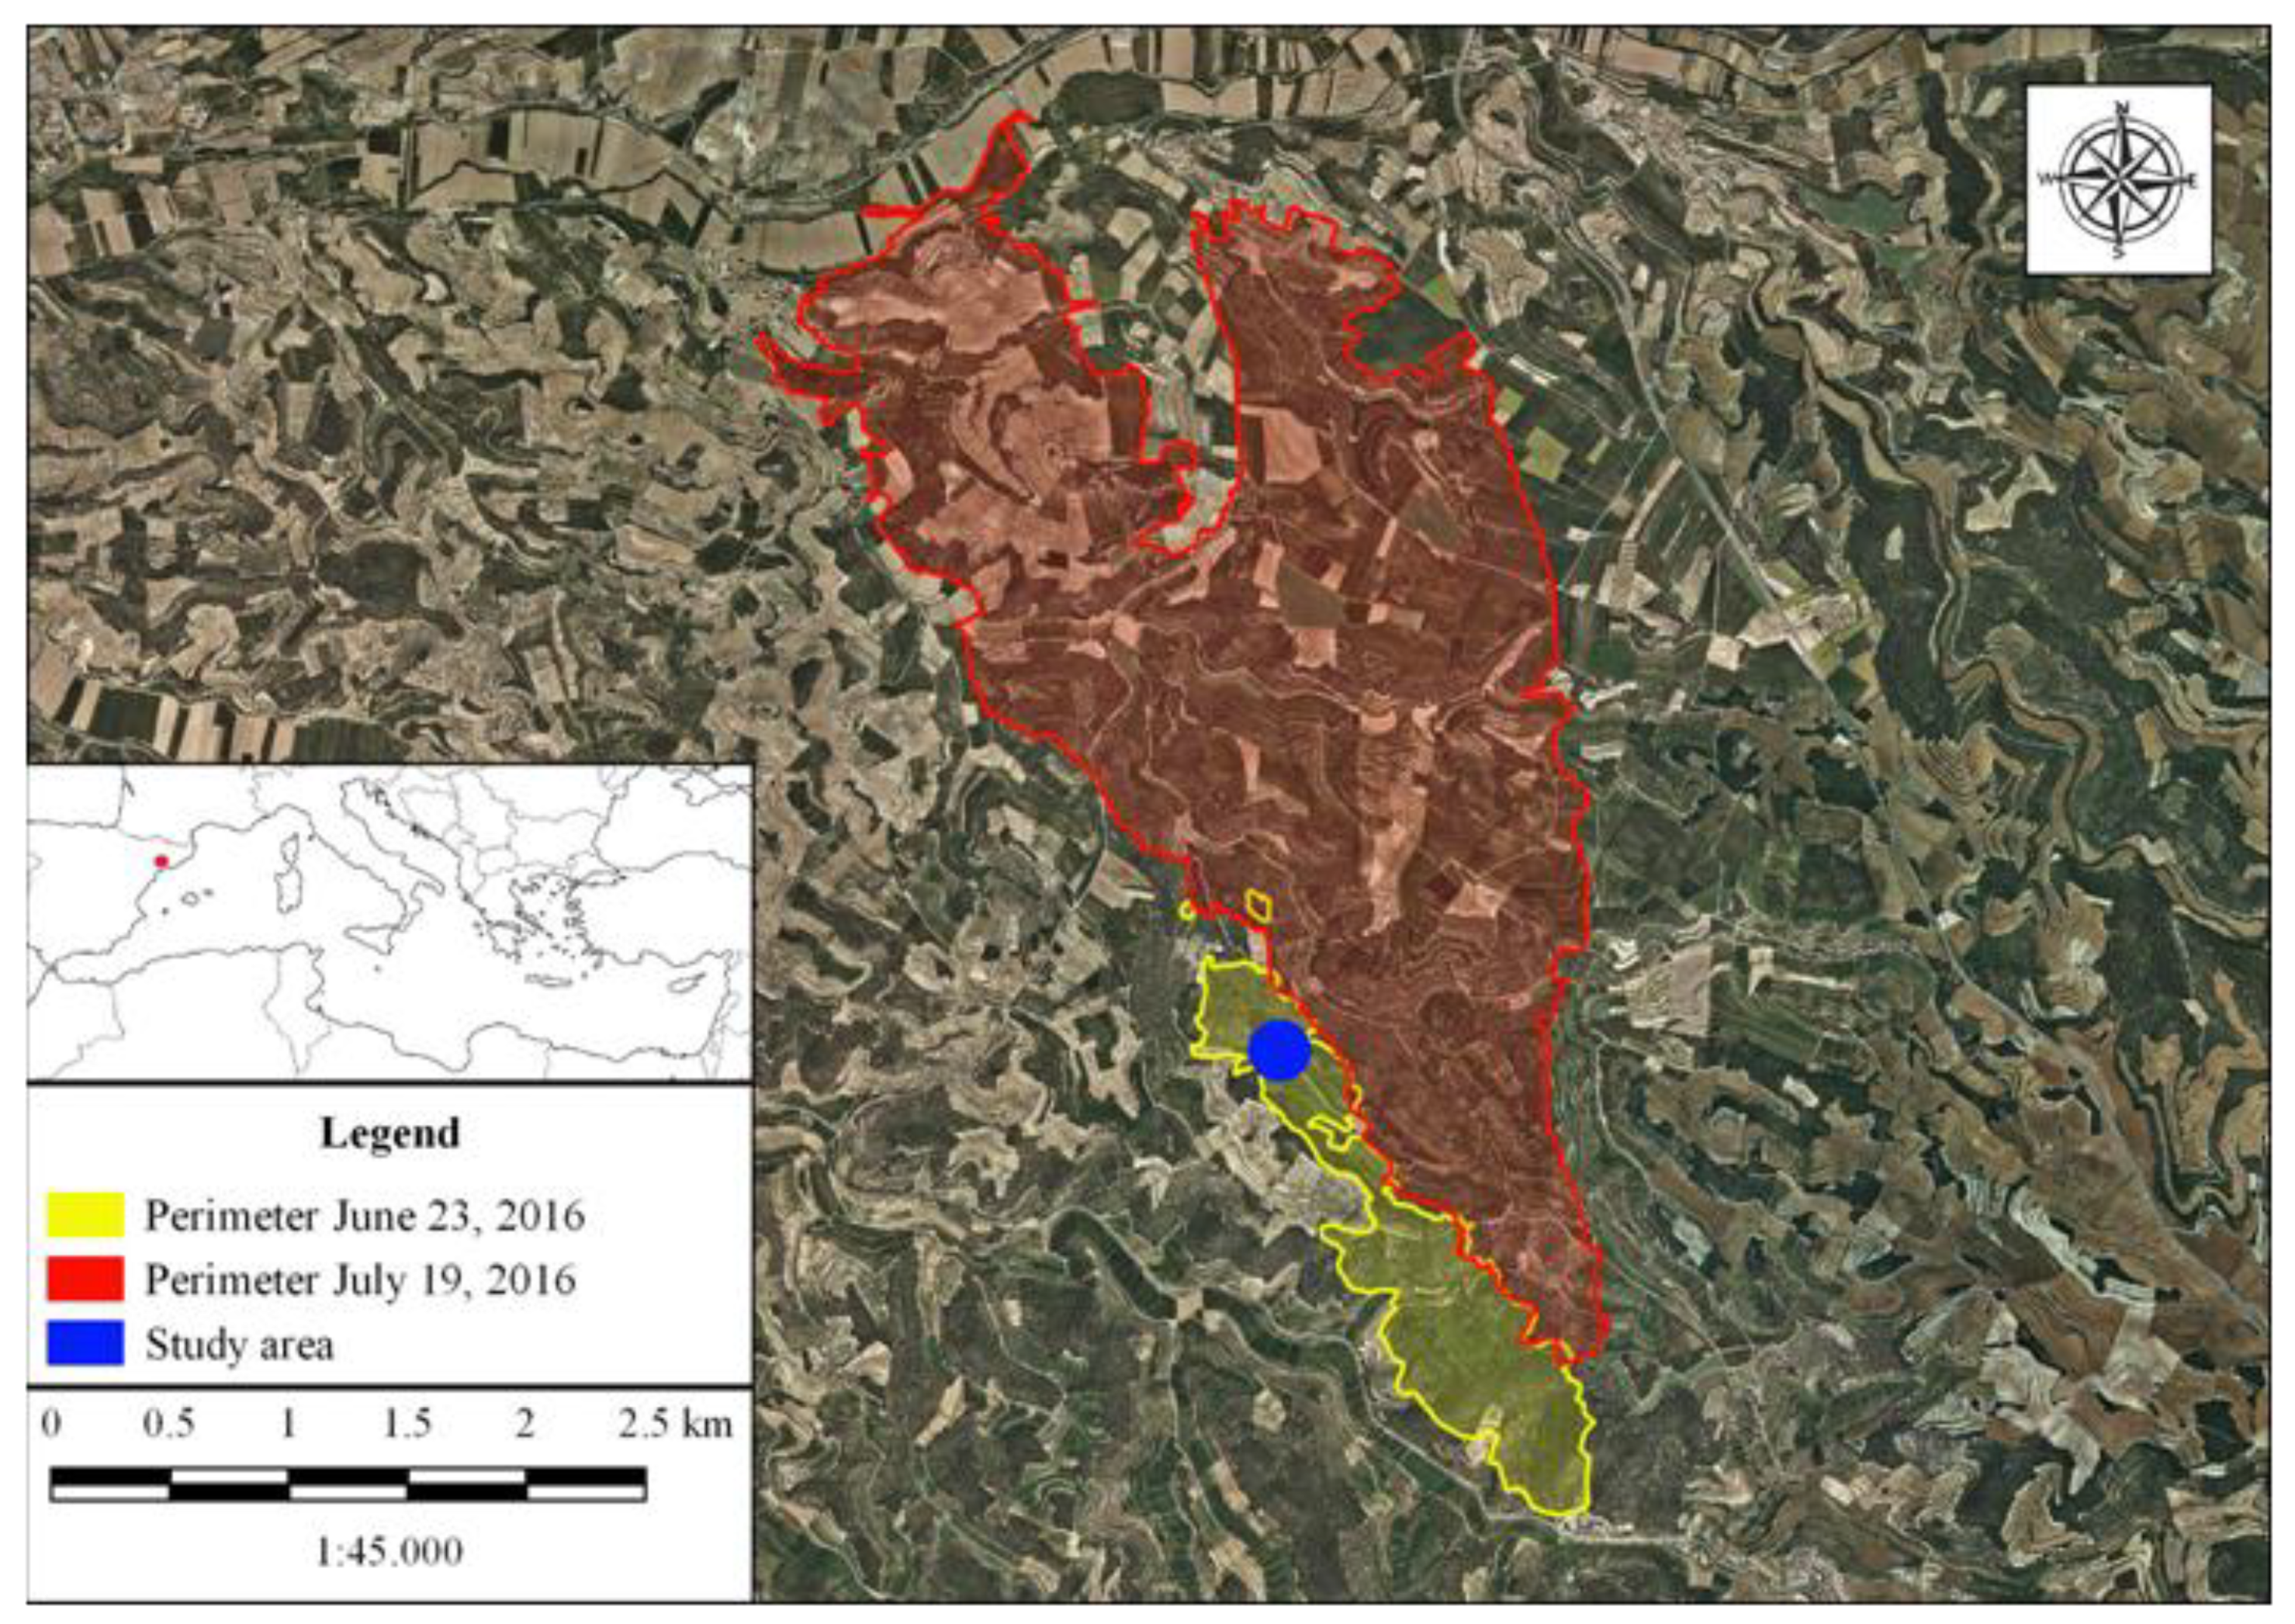 Applied Sciences Free Full Text Smouldering Combustion Dynamics Of A Soil From A Pinus Halepensis Mill Forest A Case Study Of The Rocallaura Fires In Northeastern Spain Html